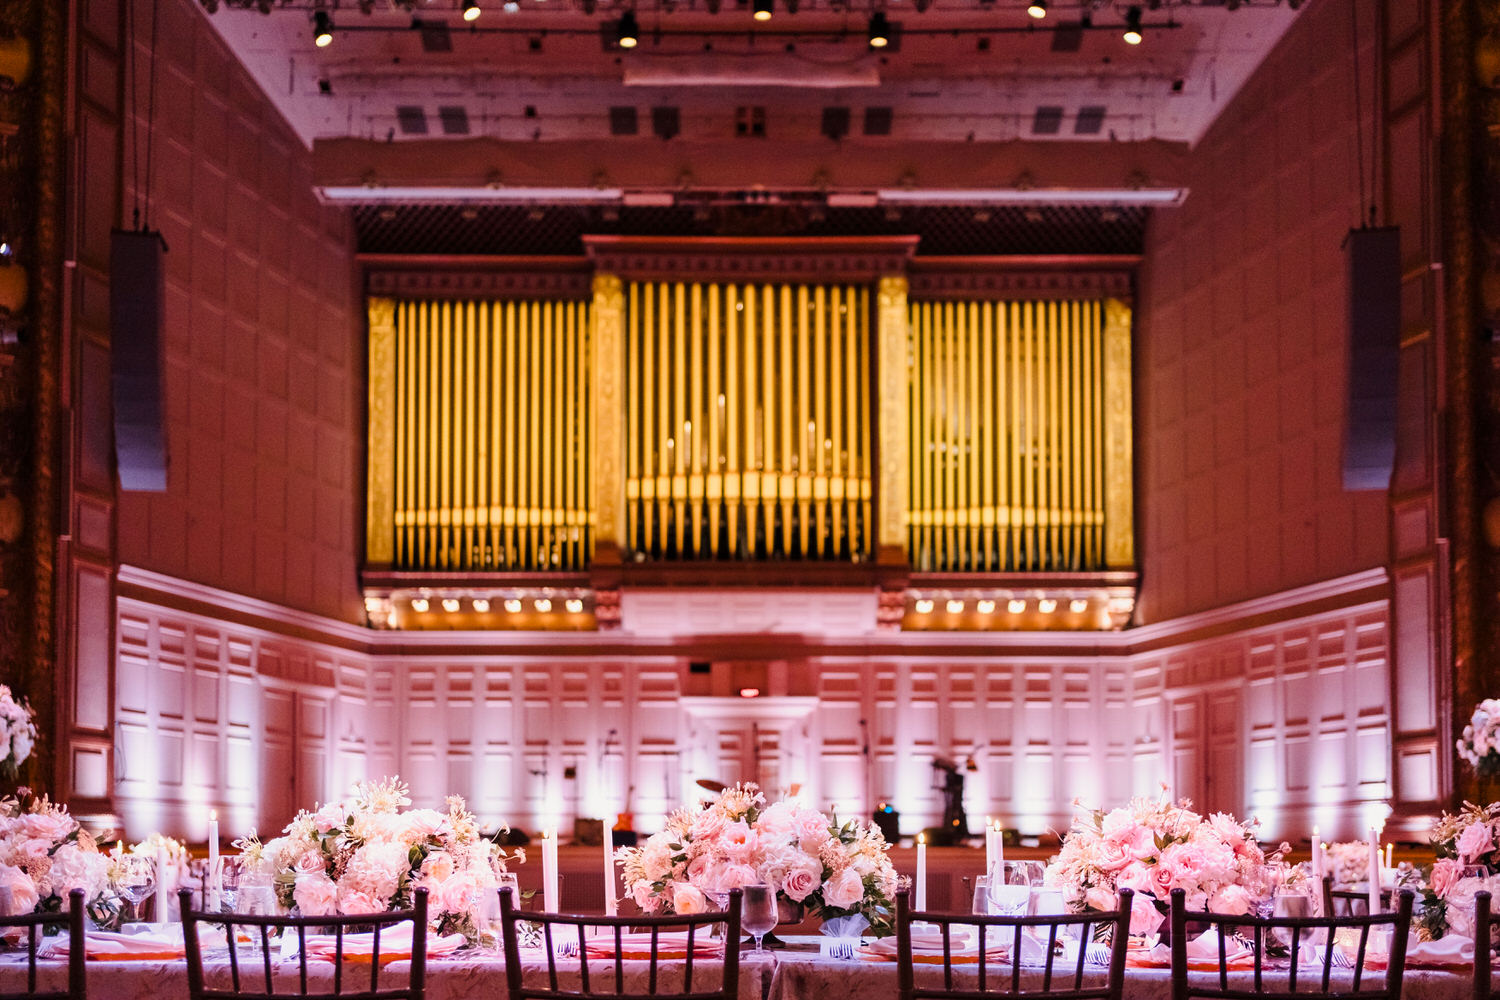 A wedding reception set up in a large room with a large organ.